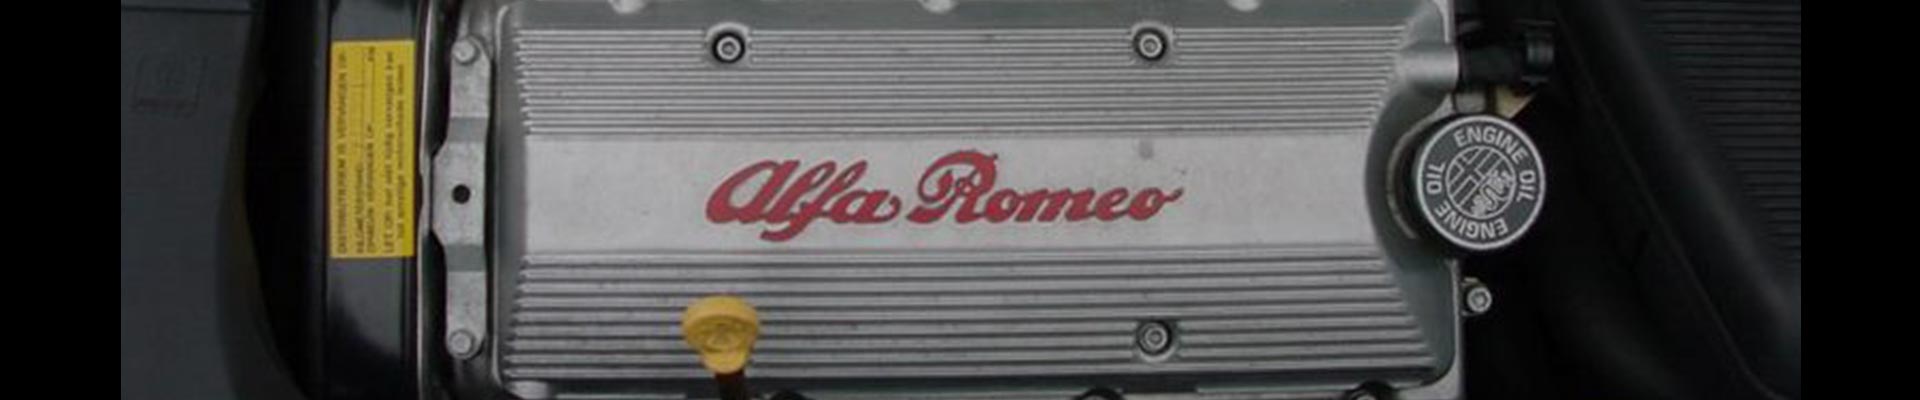 Shop Replacement 1987 Alfa Romeo Spider Parts with Discounted Price on the Net